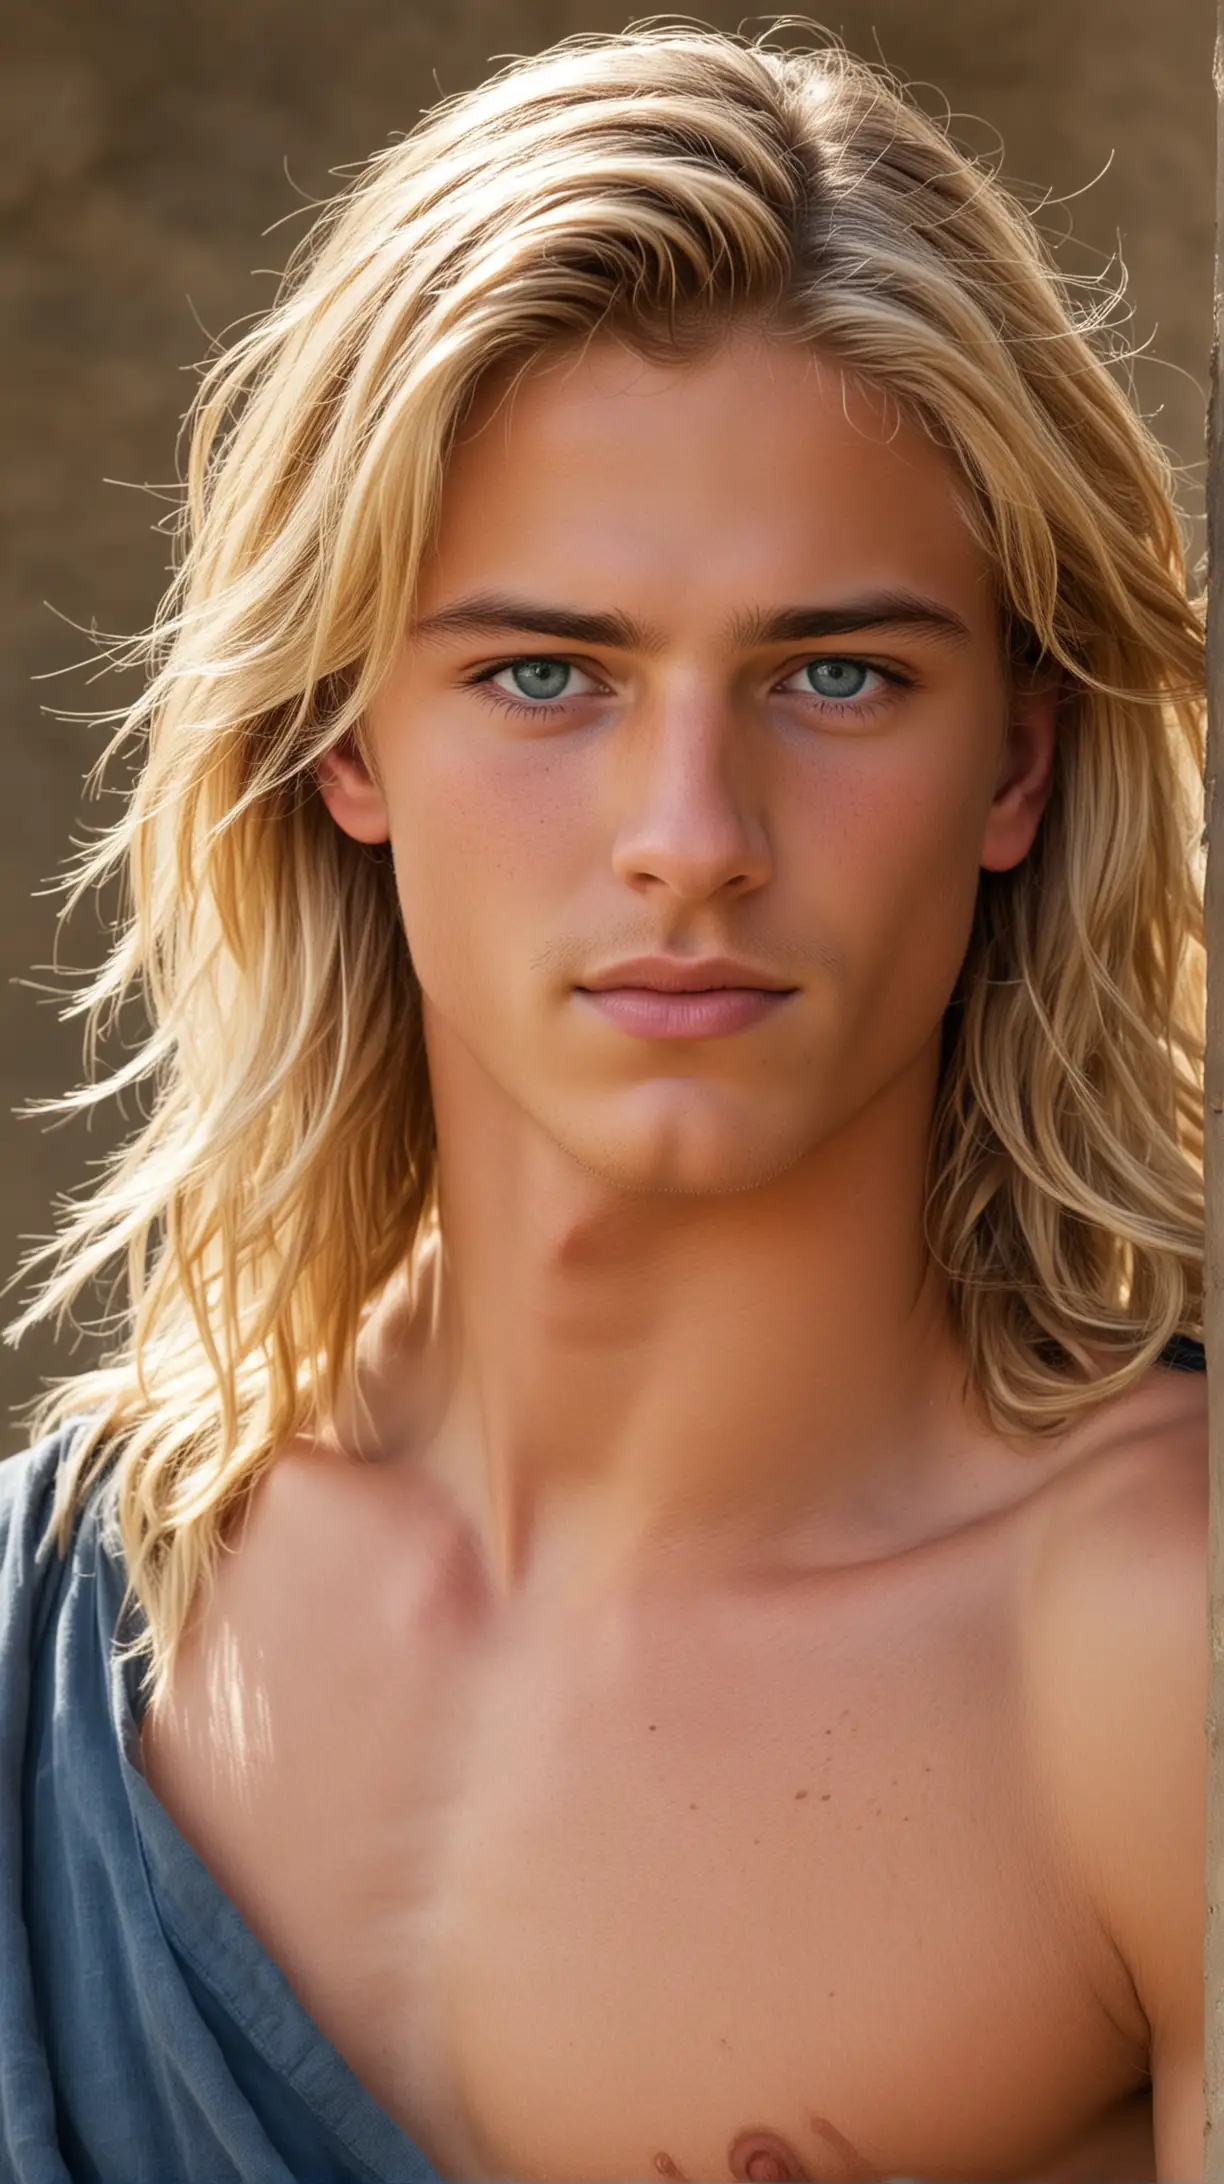 very cute boyish 18 year old young Spartan slave boy, tanned beautiful, slim and lean, with very long blond wavy hair, and blue eyes